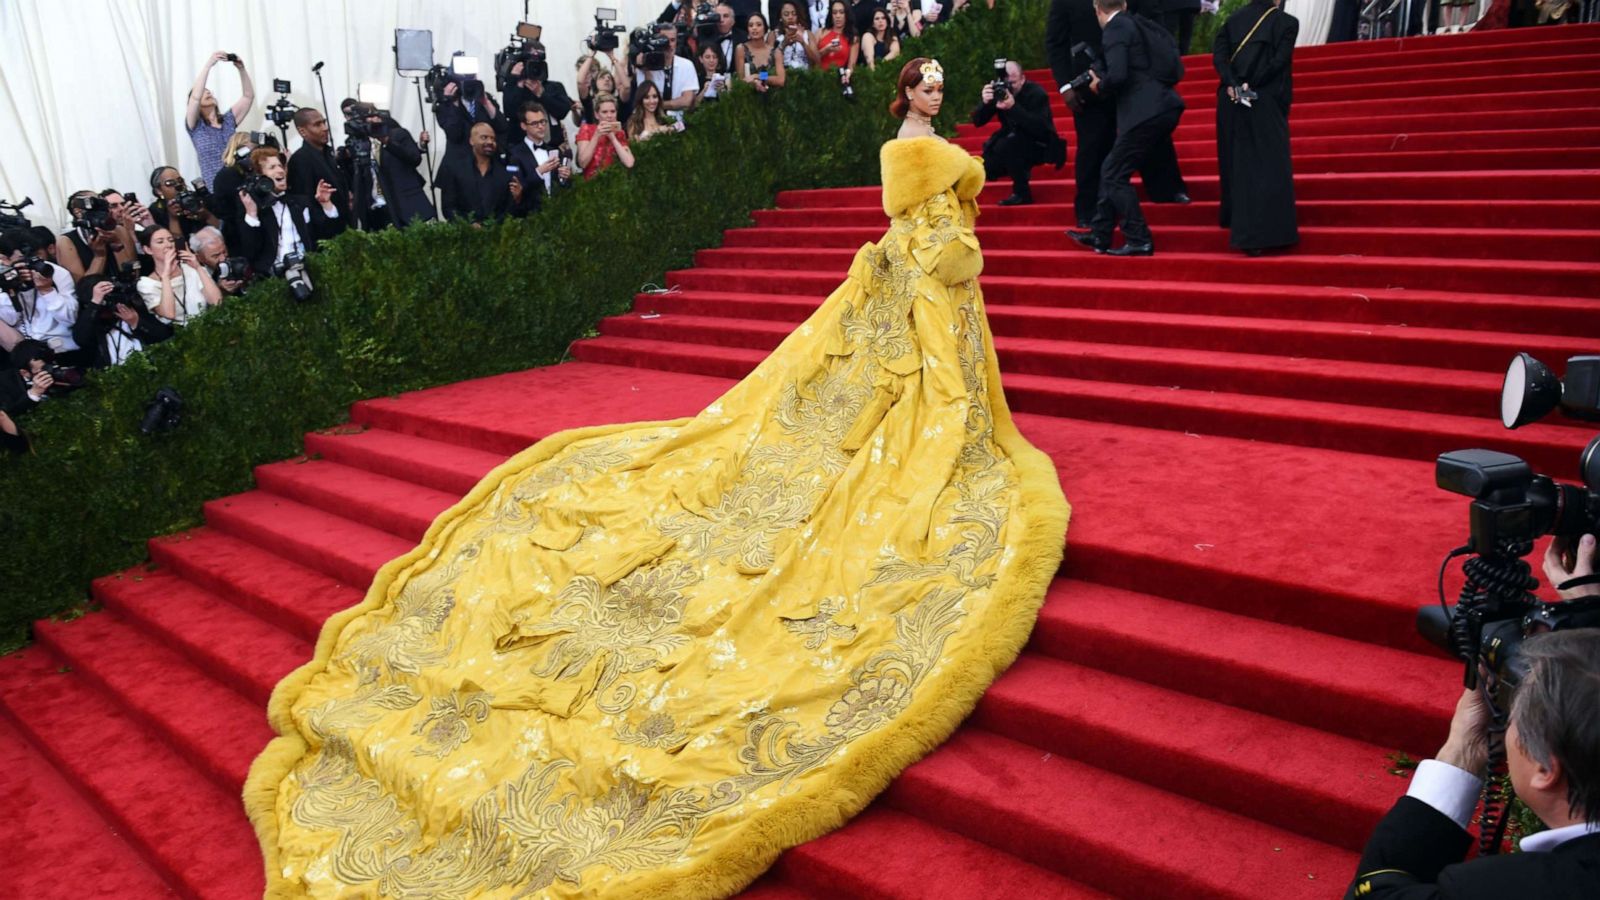 PHOTO: Rihanna arrives at the 2015 Metropolitan Museum of Art's Costume Institute Gala benefit in honor of the museums latest exhibit China: Through the Looking Glass May 4, 2015 in New York.